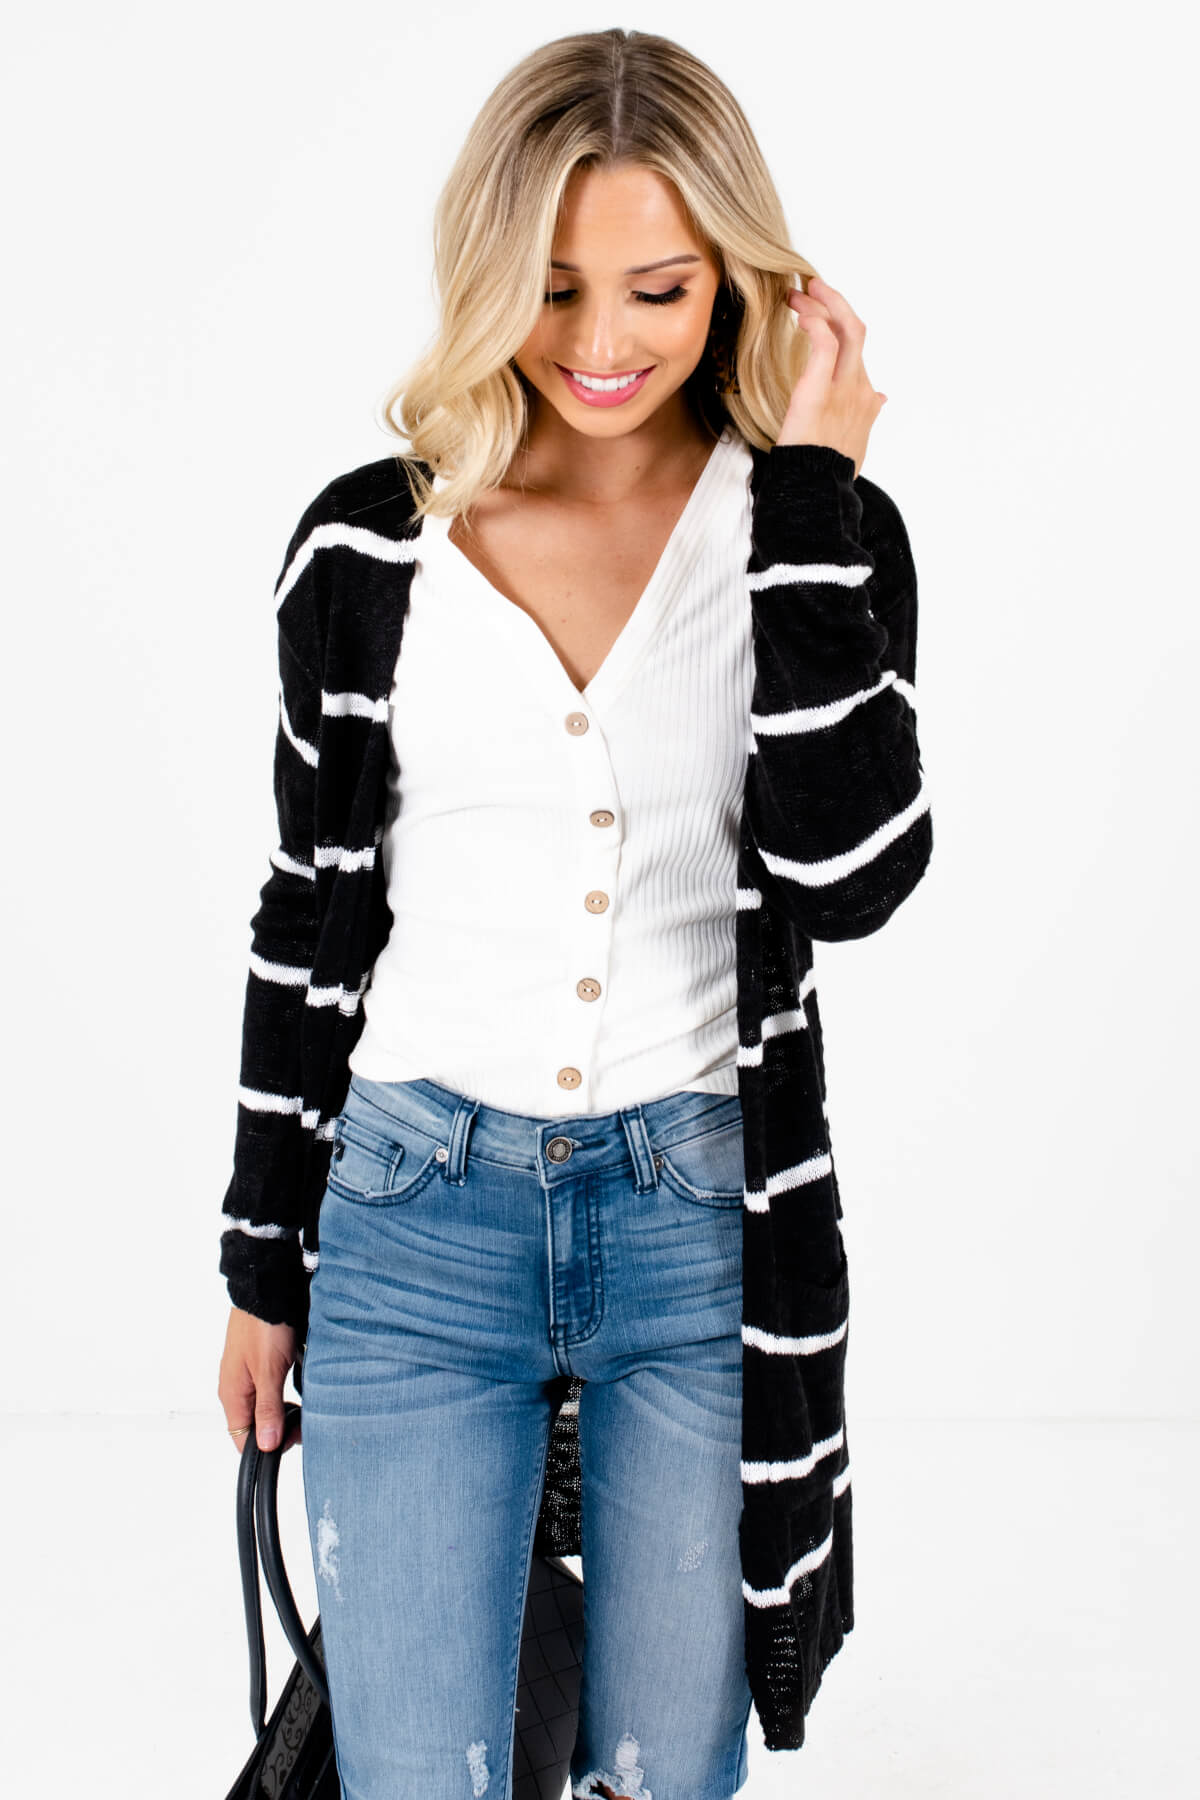 Black Cute and Comfortable Boutique Cardigans for Women